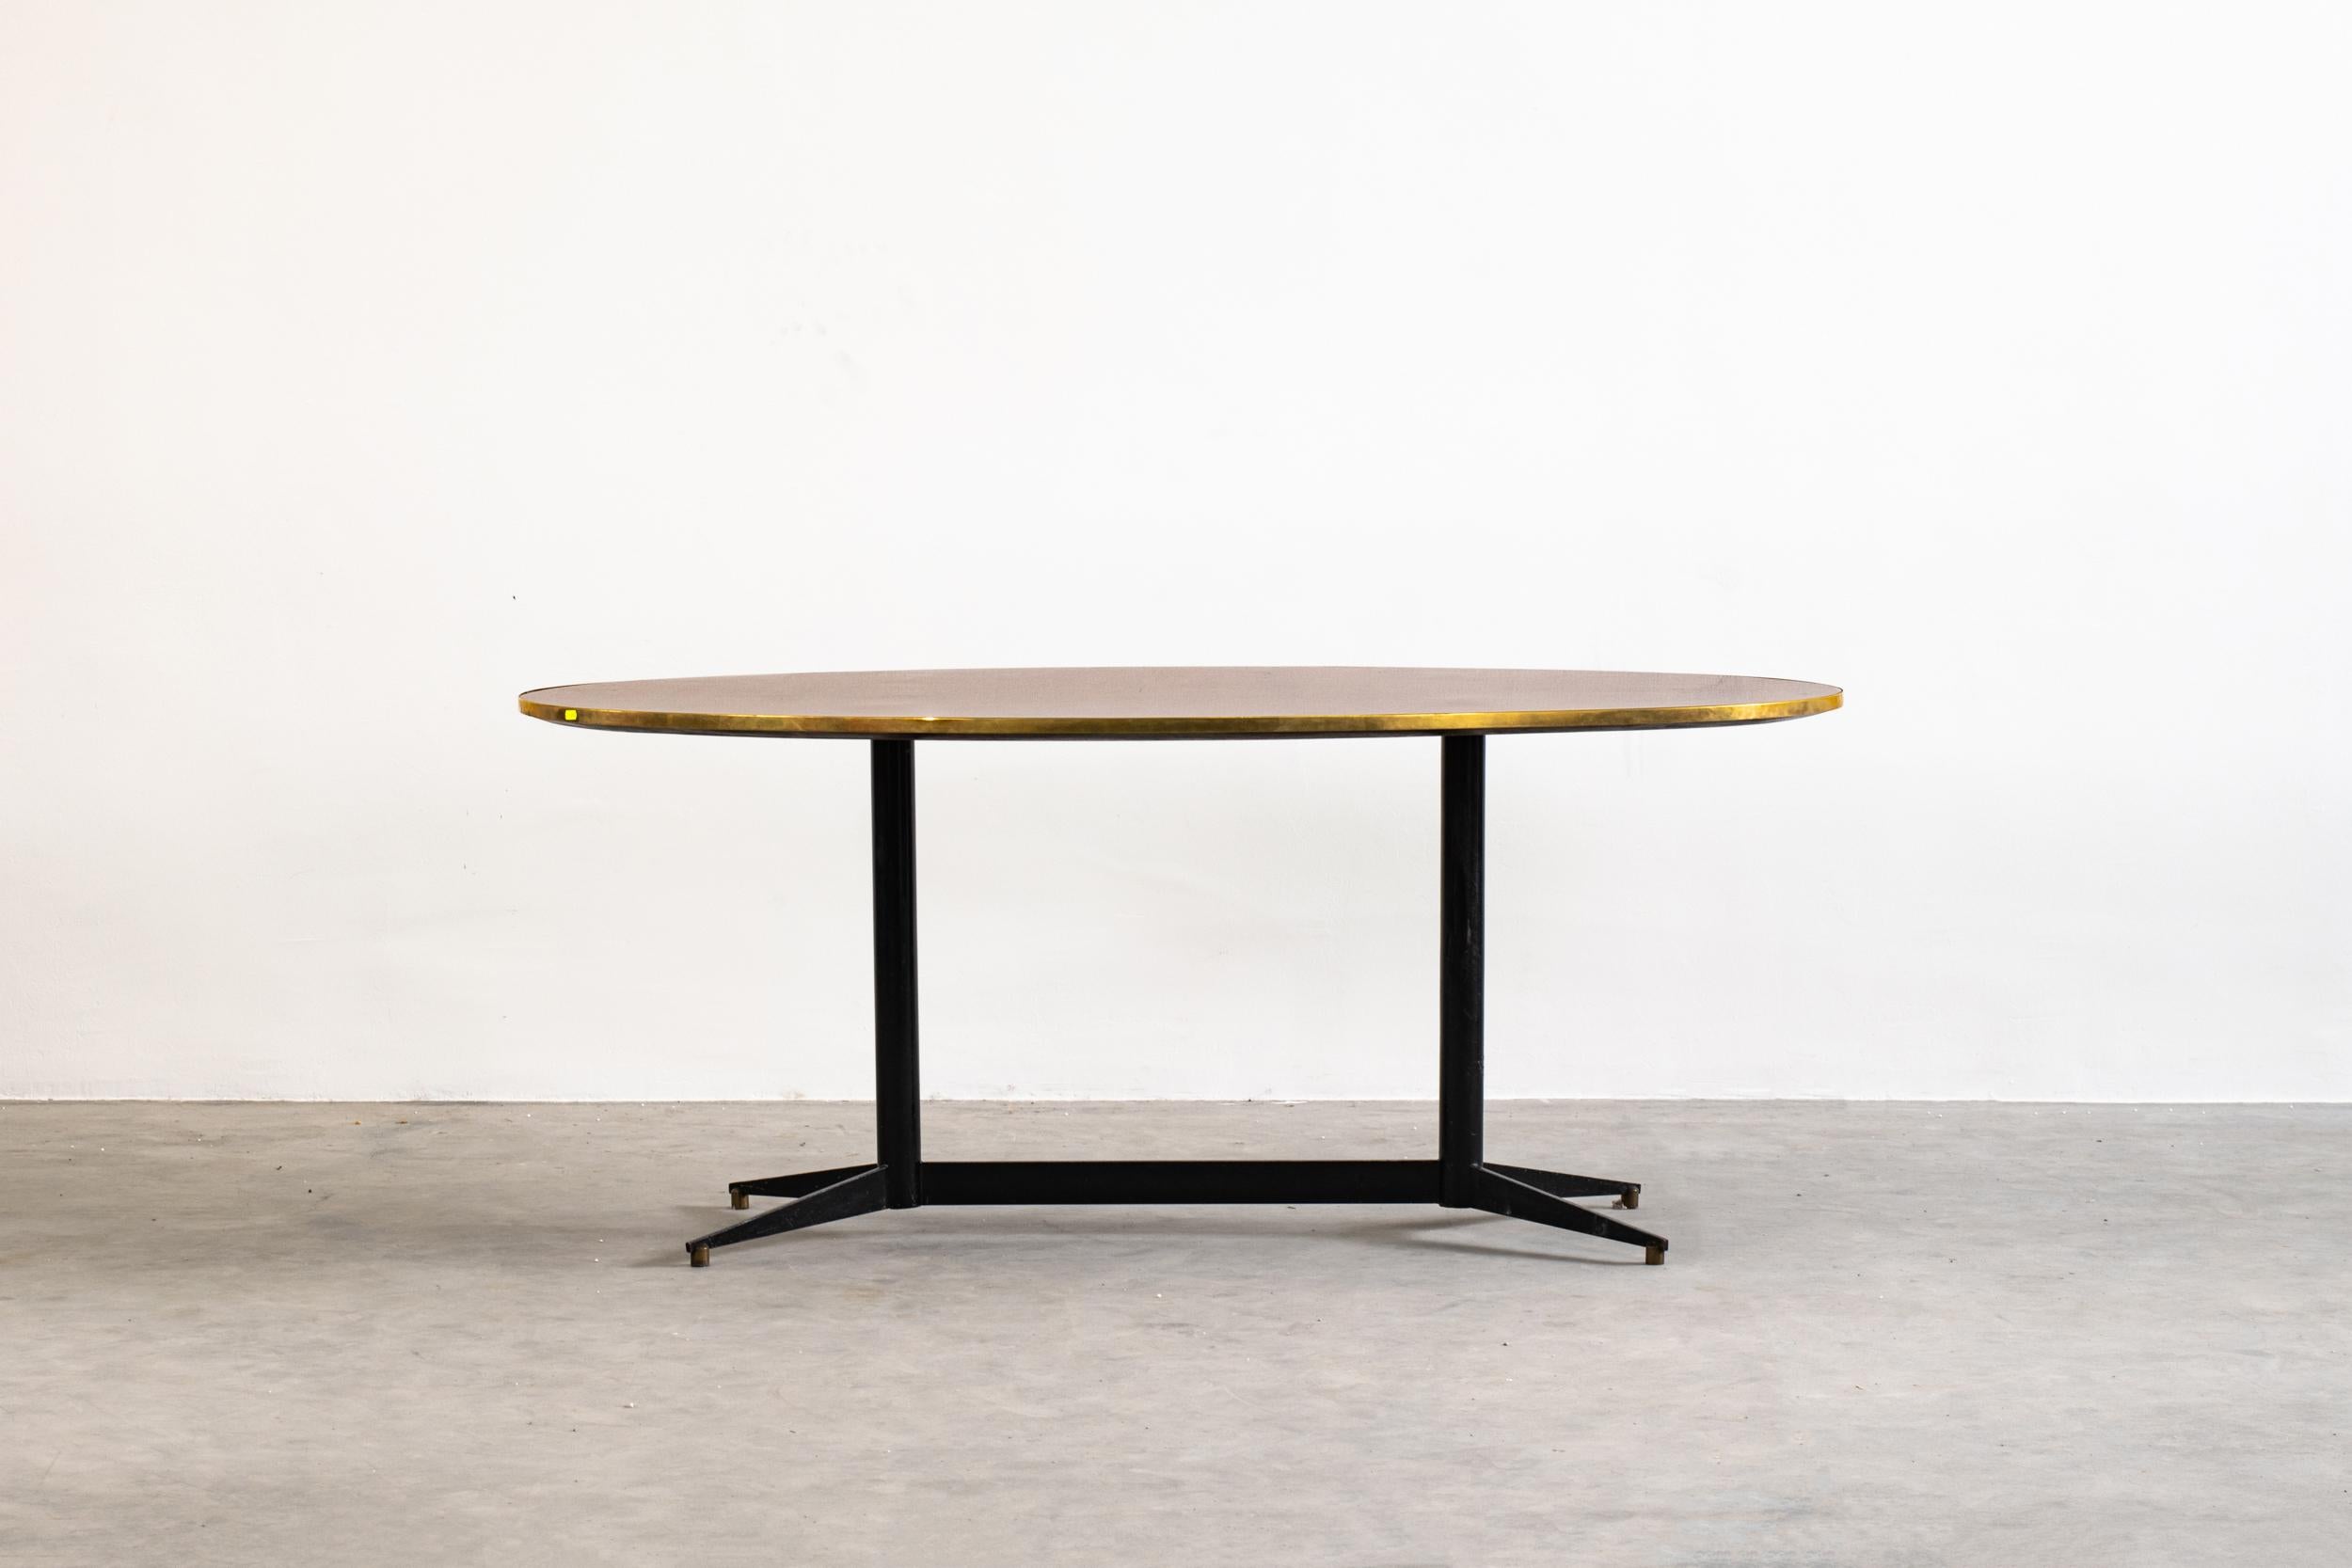 Oval dining table in wood, metal and brass details, designed by Gio Ponti, Production Rima, 1950s Italy.
Available with expertise released by Gio Ponti Archive (Milano). 

Literature: Catalogo Gastone Rinaldi, Designer alla RIMA a cura di Giuseppe e